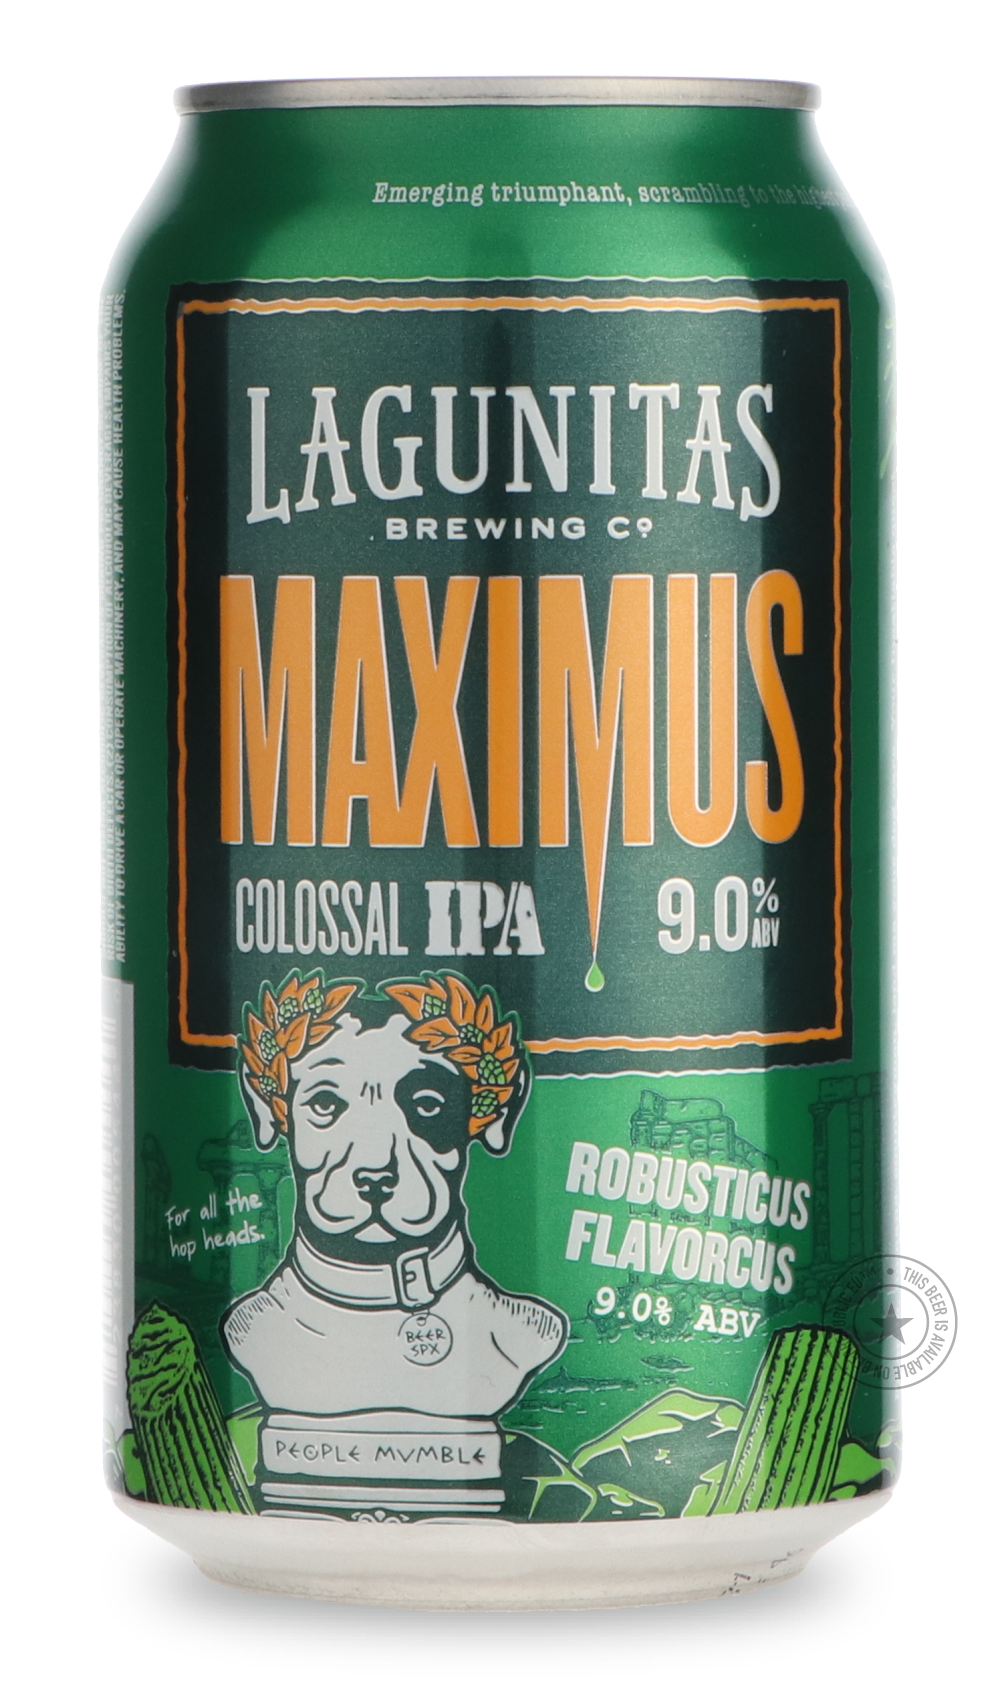 -Lagunitas- Maximus Colossal IPA-IPA- Only @ Beer Republic - The best online beer store for American & Canadian craft beer - Buy beer online from the USA and Canada - Bier online kopen - Amerikaans bier kopen - Craft beer store - Craft beer kopen - Amerikanisch bier kaufen - Bier online kaufen - Acheter biere online - IPA - Stout - Porter - New England IPA - Hazy IPA - Imperial Stout - Barrel Aged - Barrel Aged Imperial Stout - Brown - Dark beer - Blond - Blonde - Pilsner - Lager - Wheat - Weizen - Amber - 